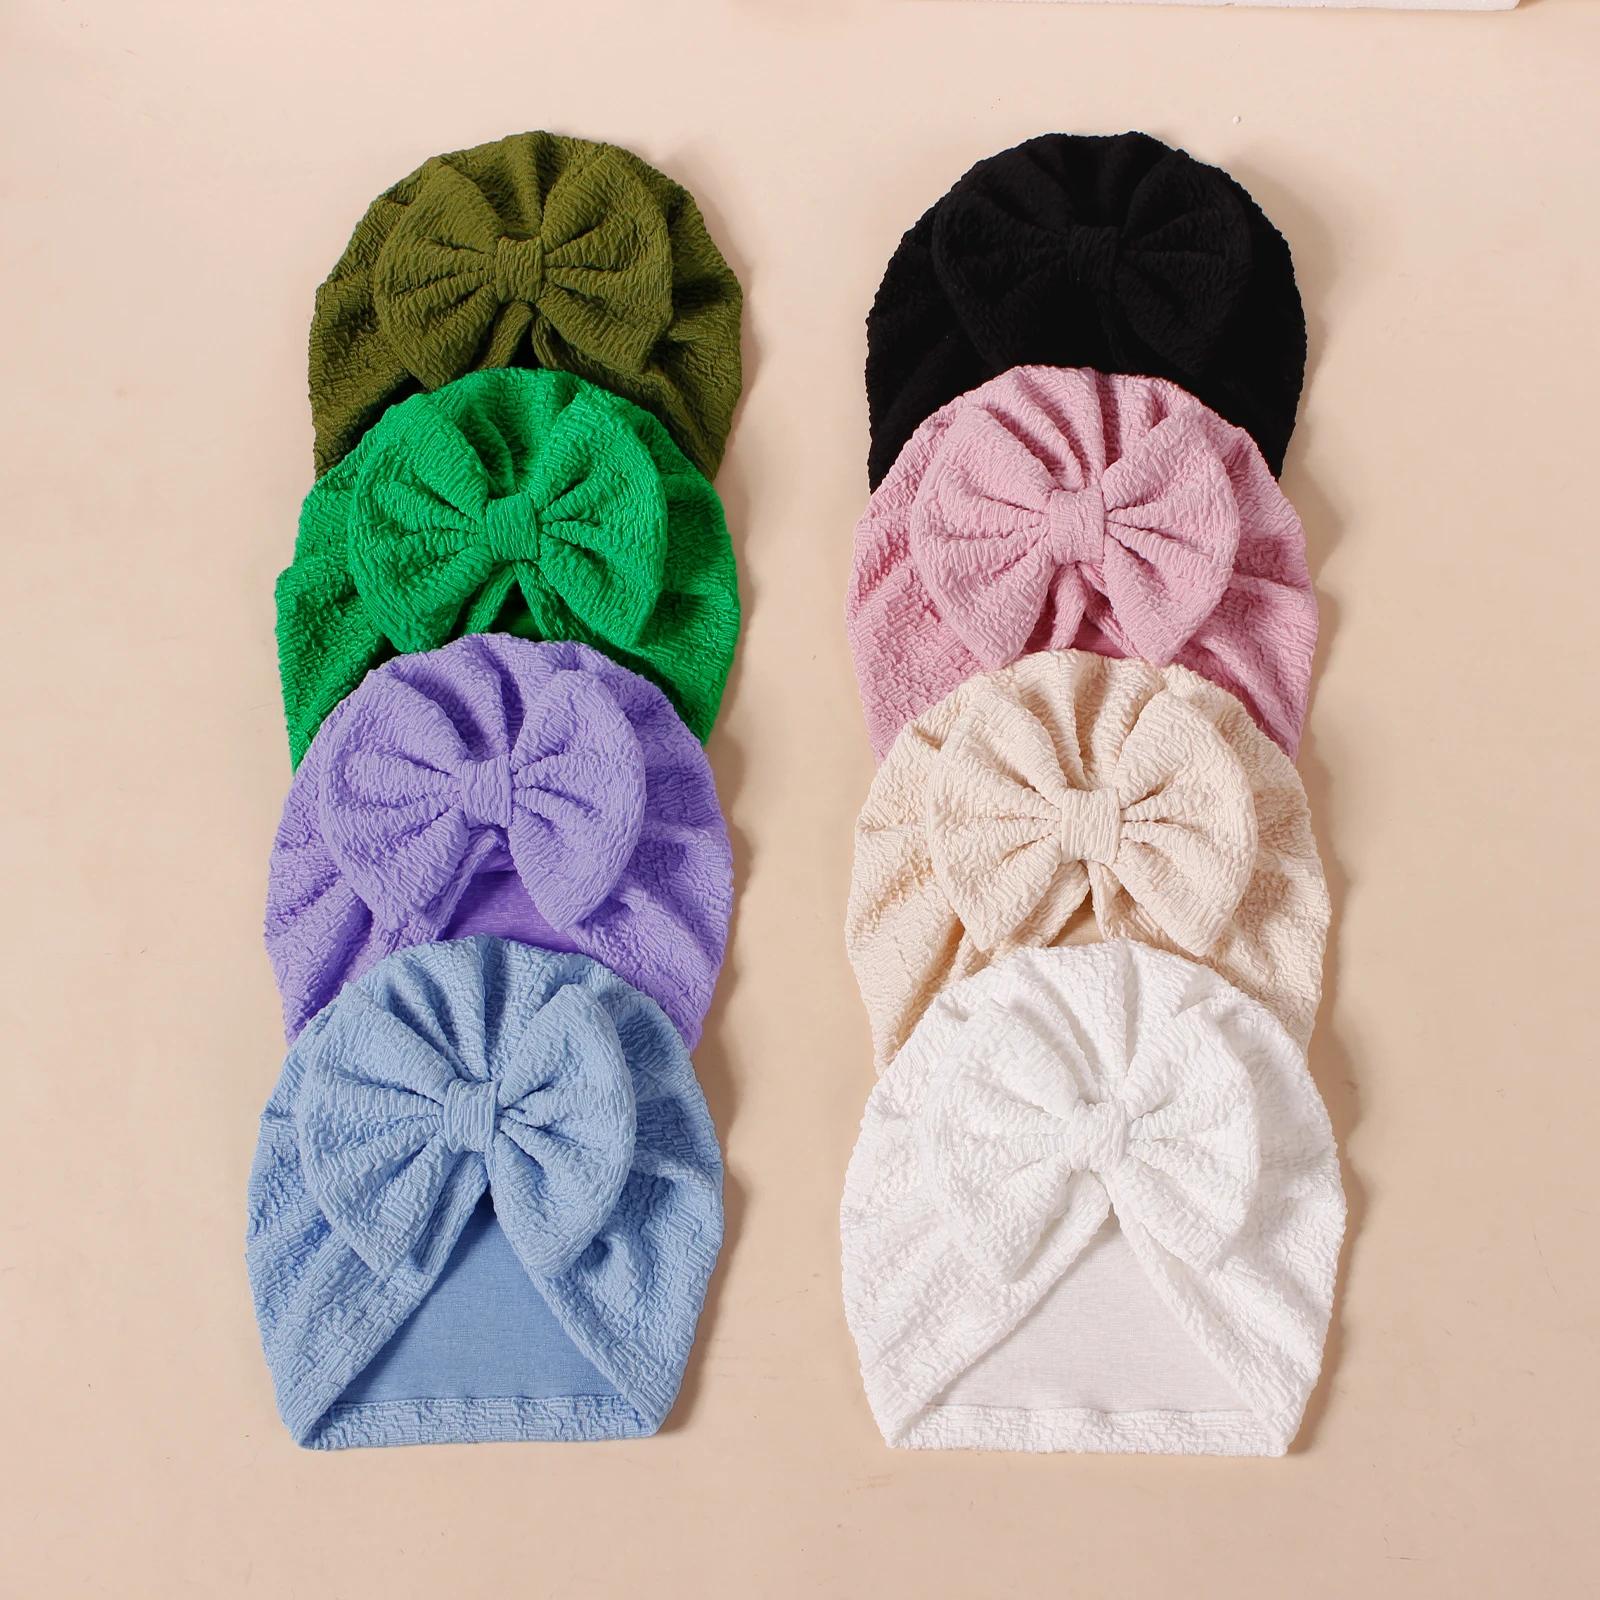 New Soft Cotton Bowknot Turban Babes Solid Color HeadWraps Solid Baby India Hat Kid Girl Infant Beanie Cap Toddler Baby Headwear new round knot turban donuts head waps toddler babes india hat for kids girls boys cotton beanie caps baby photo props headwear